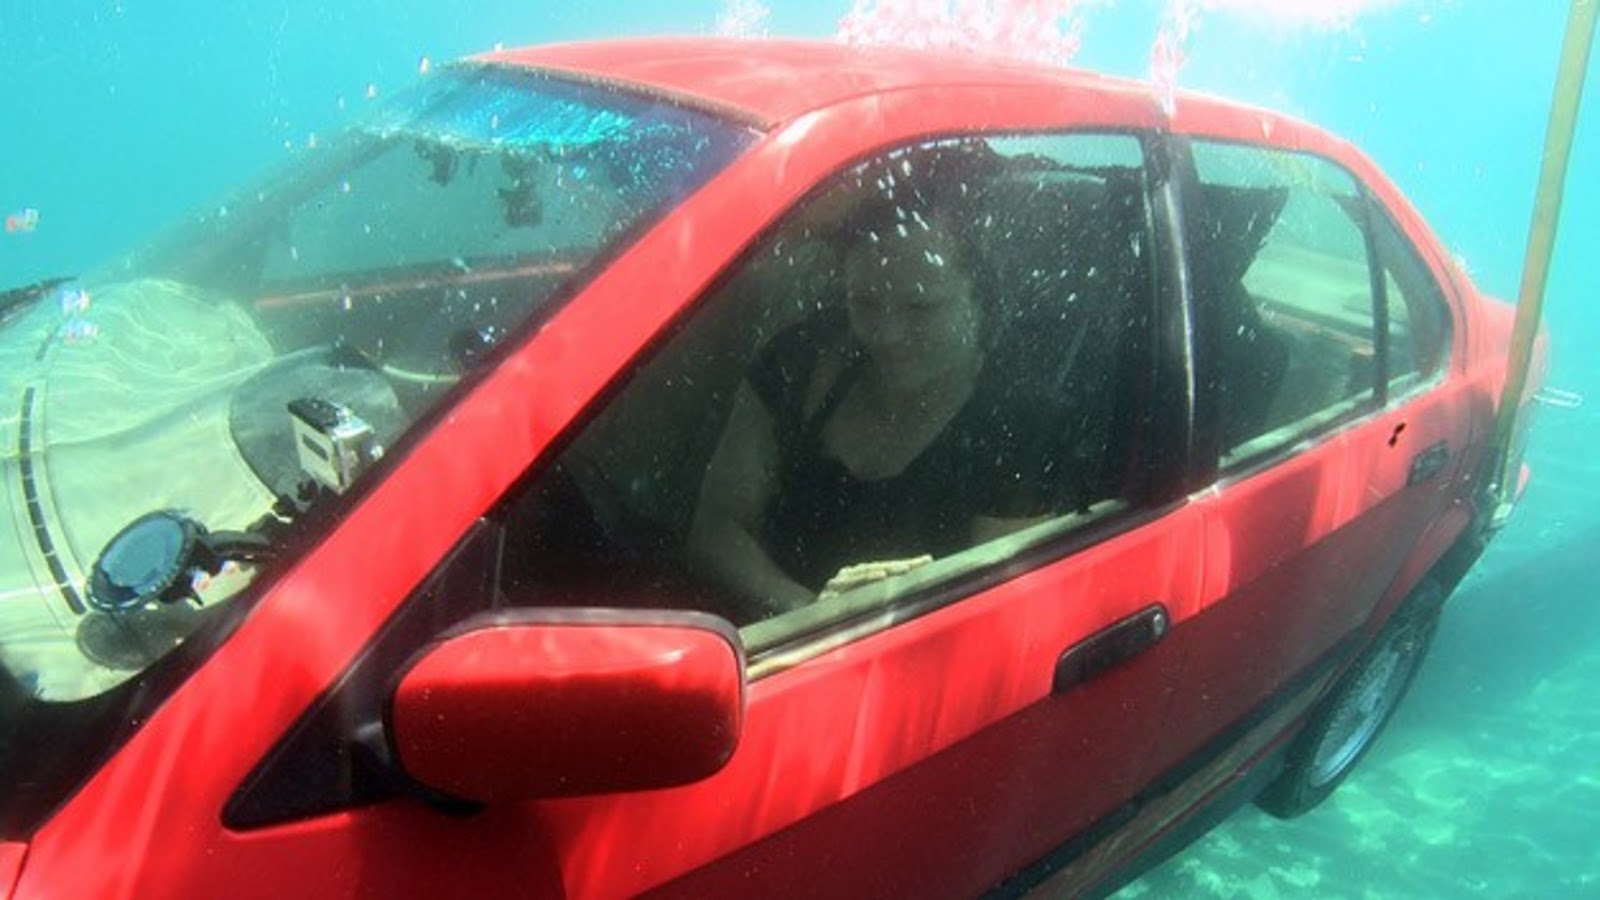 This Is The Easiest Way To Escape A Sinking Vehicle. Knowing HOW Might Save Your Life Some Day